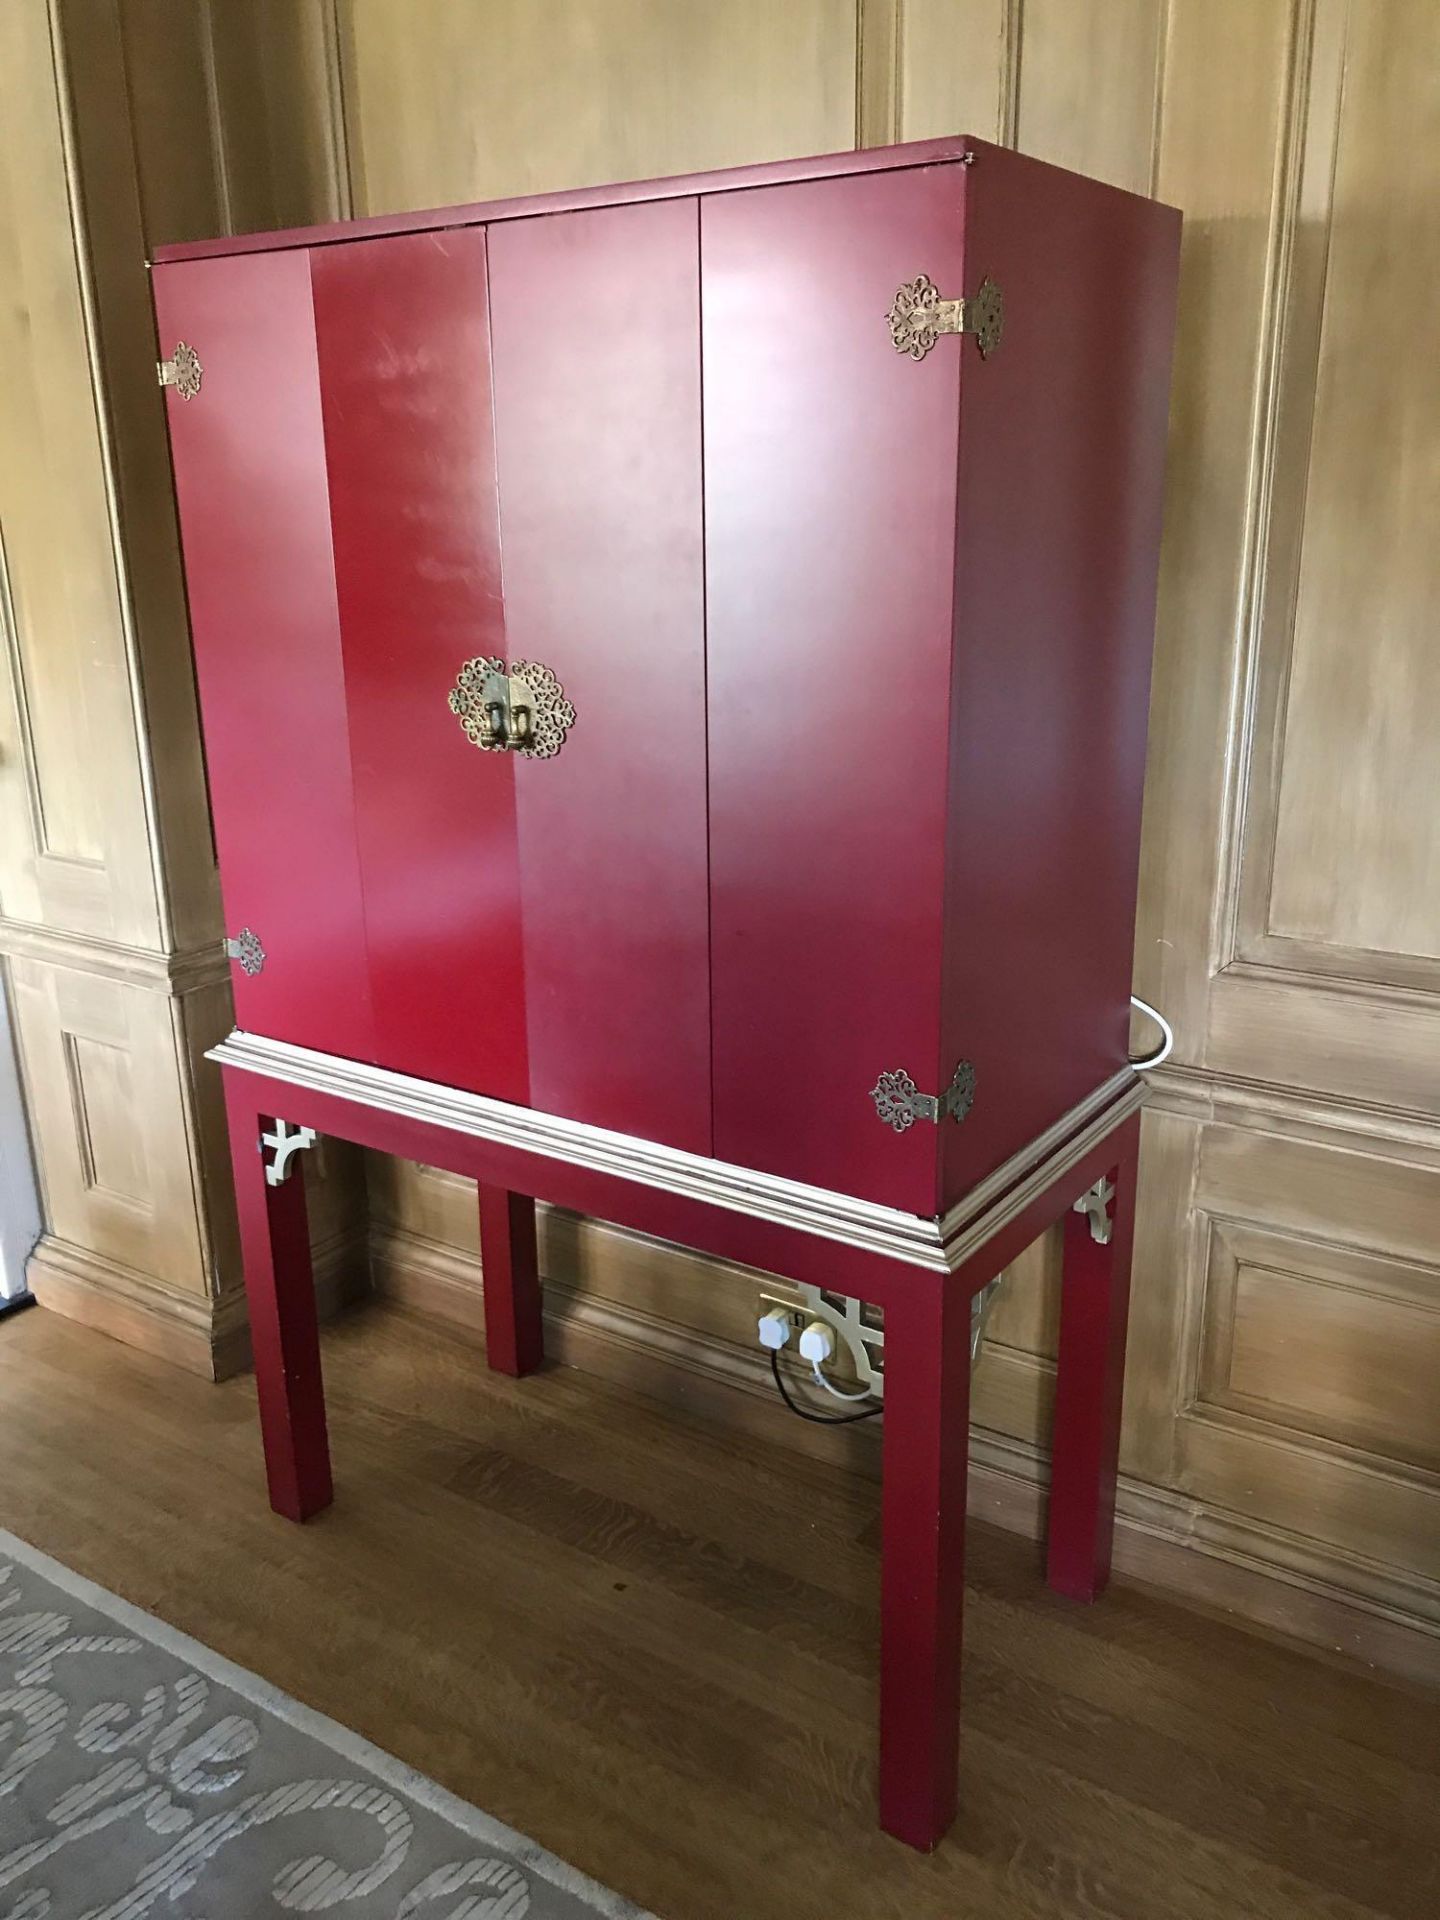 Restall Brown & Clennell English Georgian Style Red Lacquered Chinoiserie Gilded Cocktail Cabinet